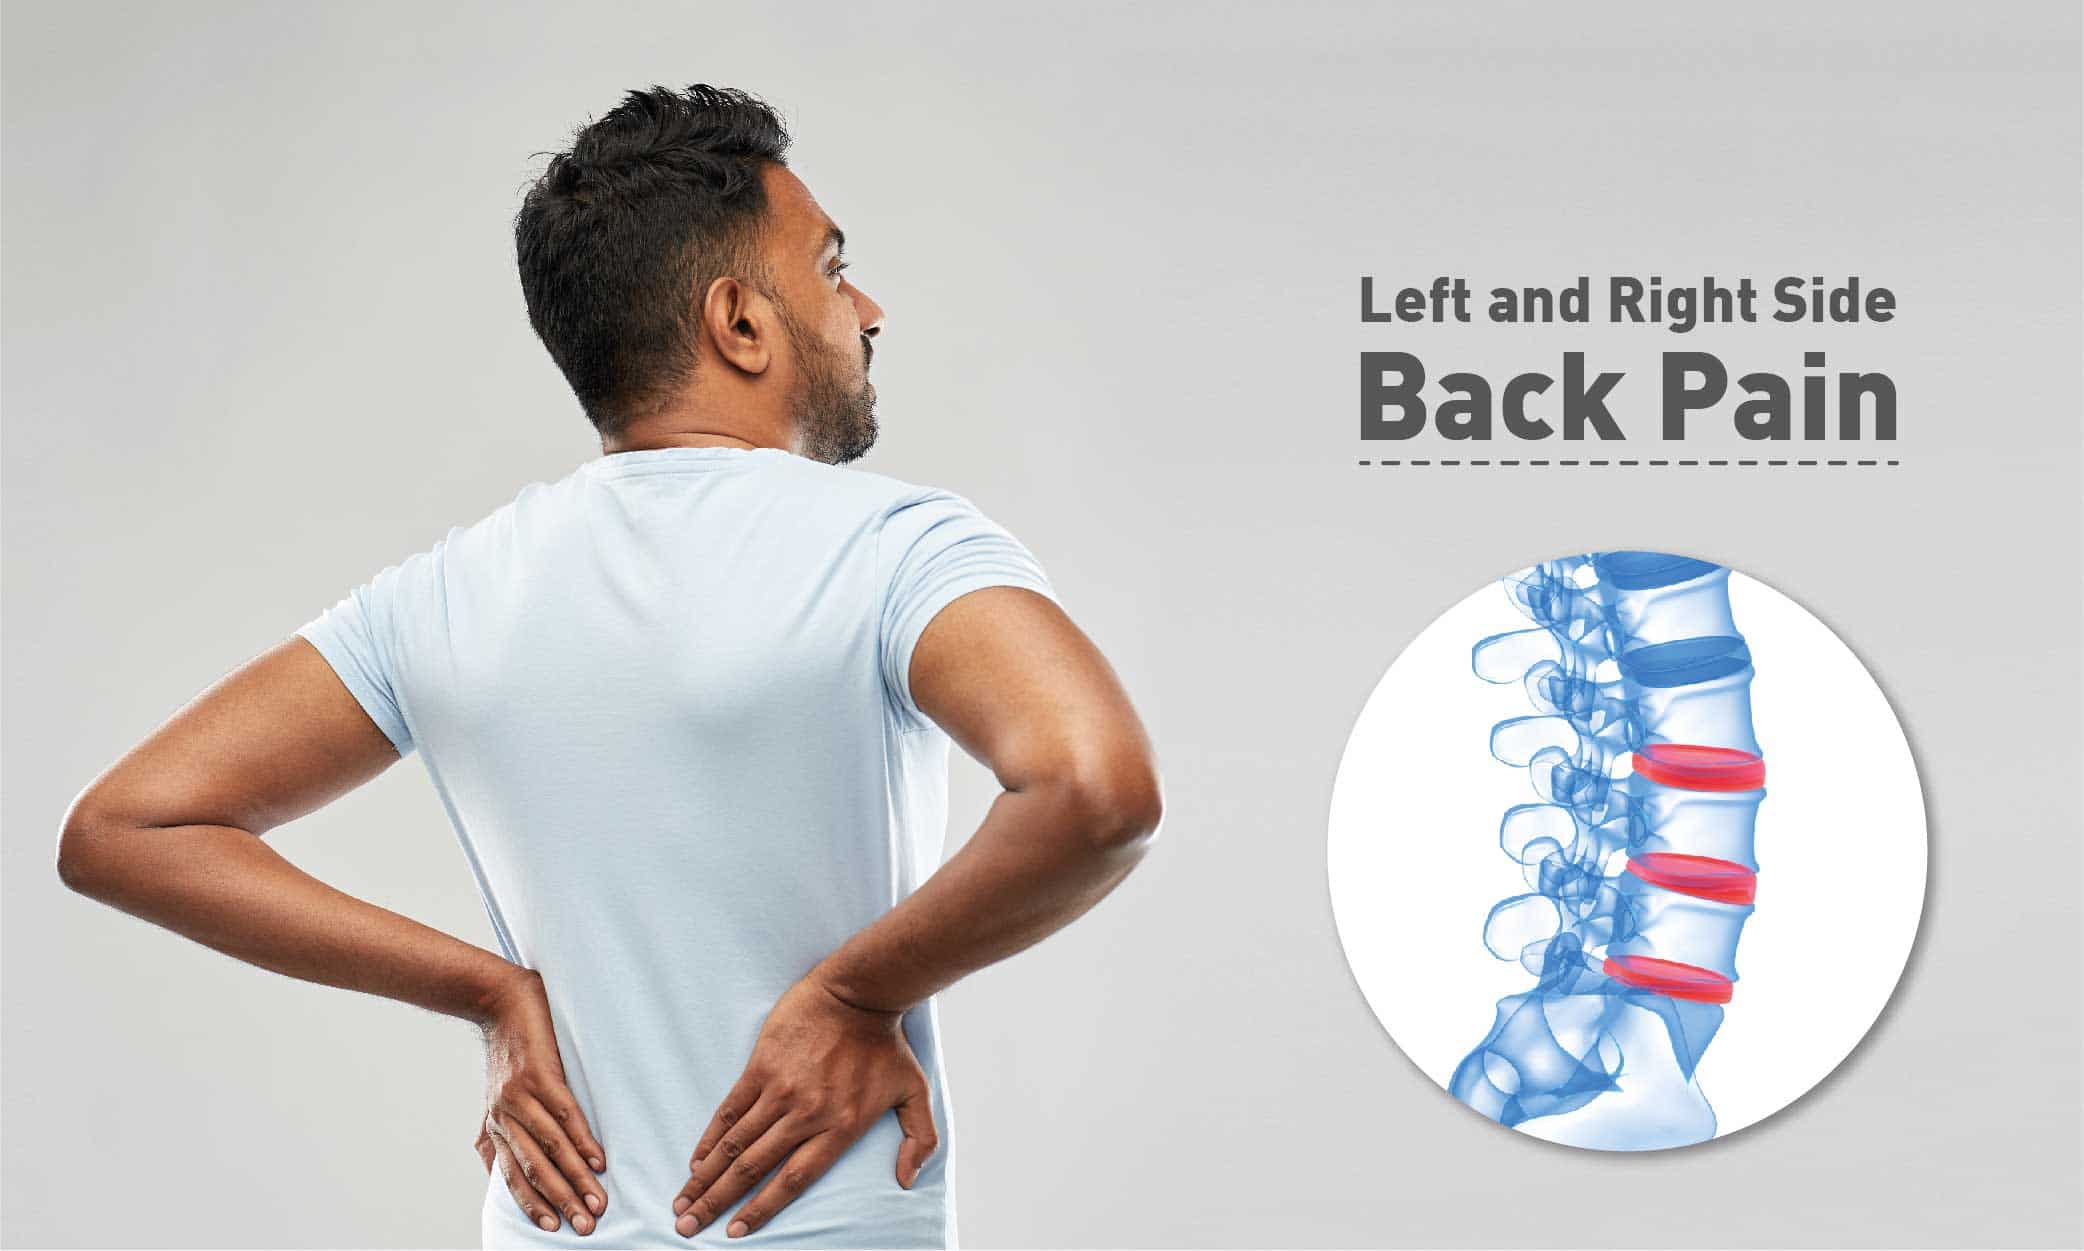 Lower Back Pain Symptoms, Diagnosis, and Treatment